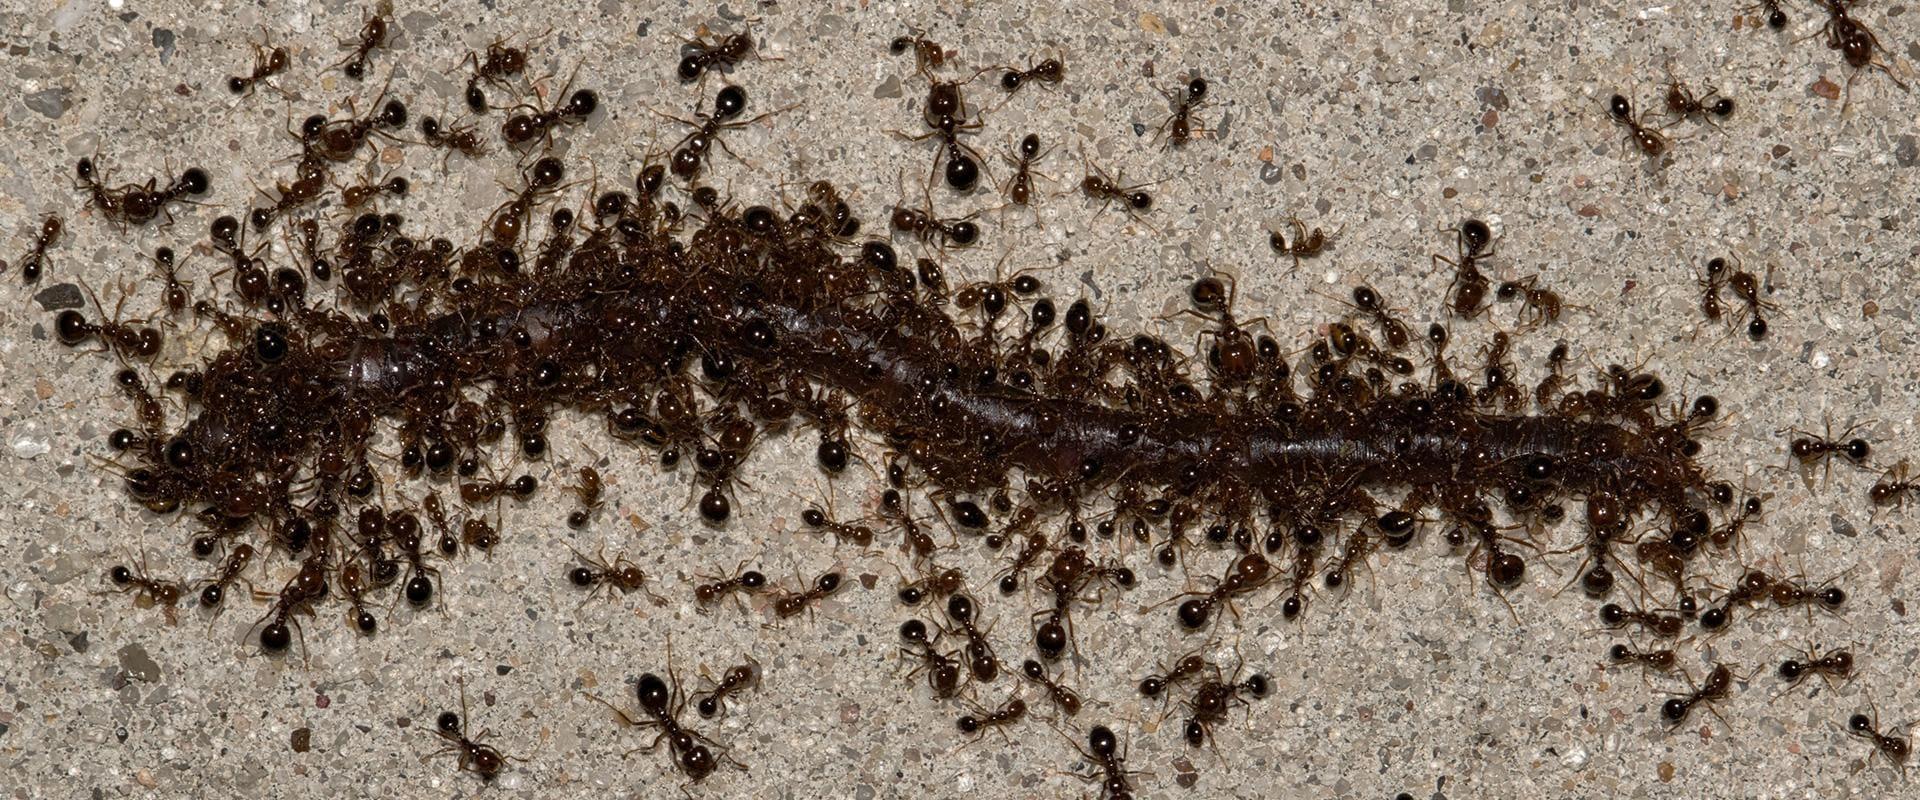 hundreds of pavement ants on a driveway